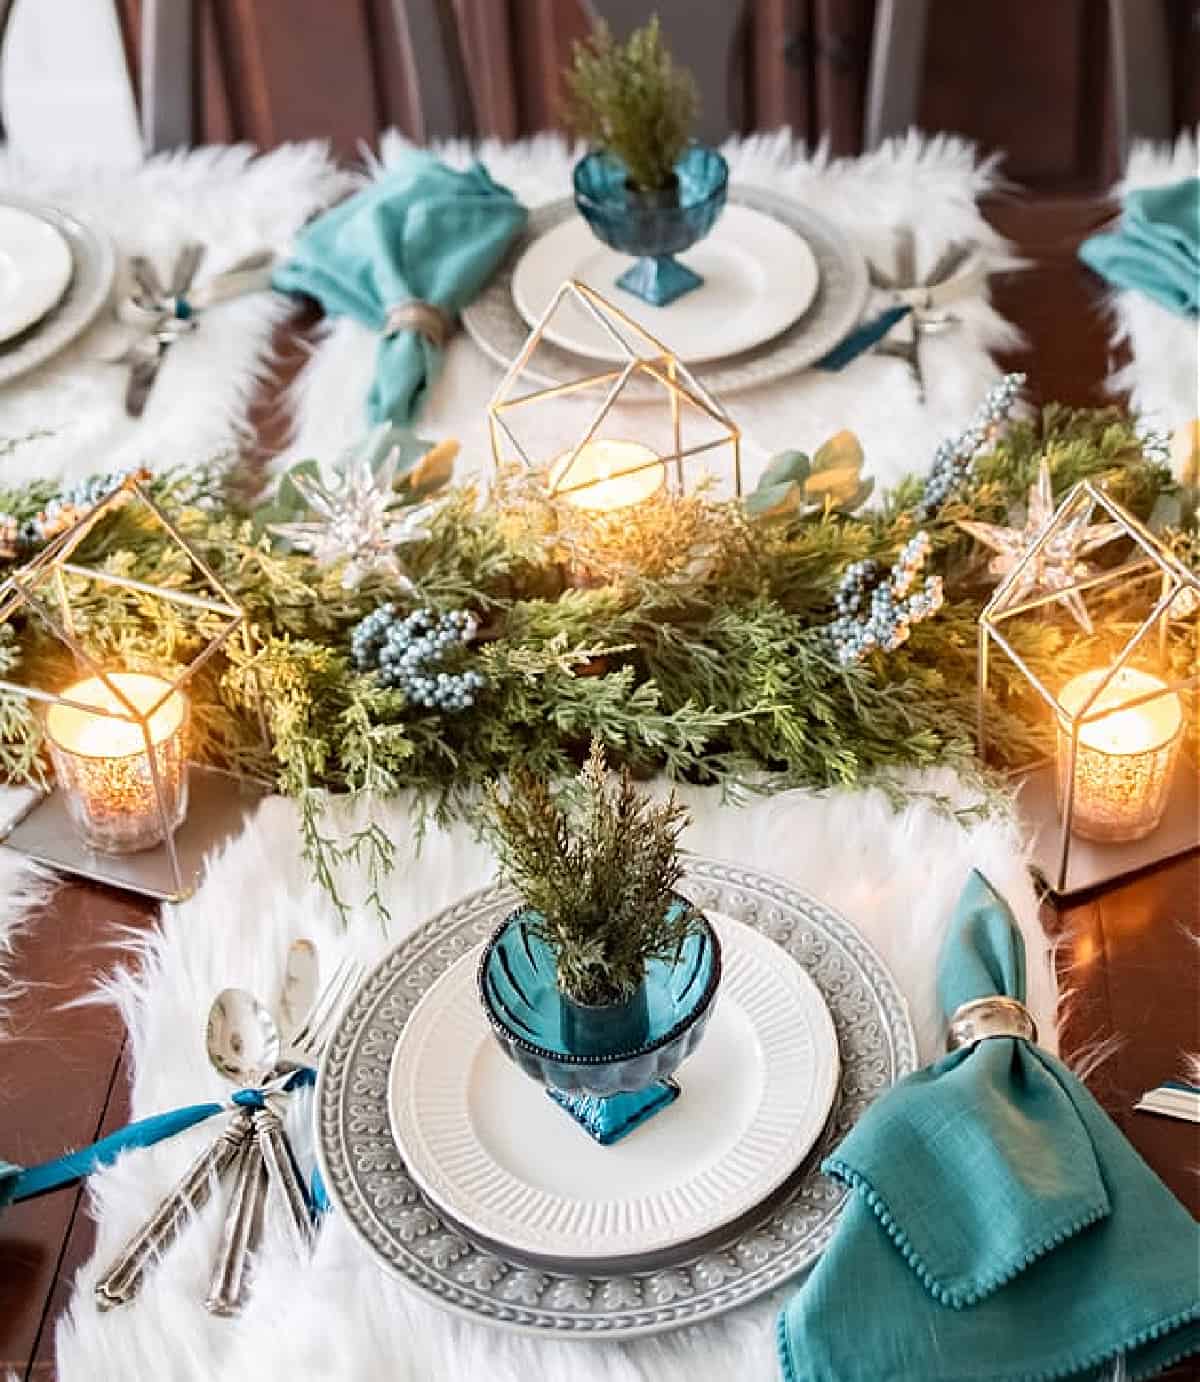 table set for winter with teal, white and gray dishes and faux fur placemats